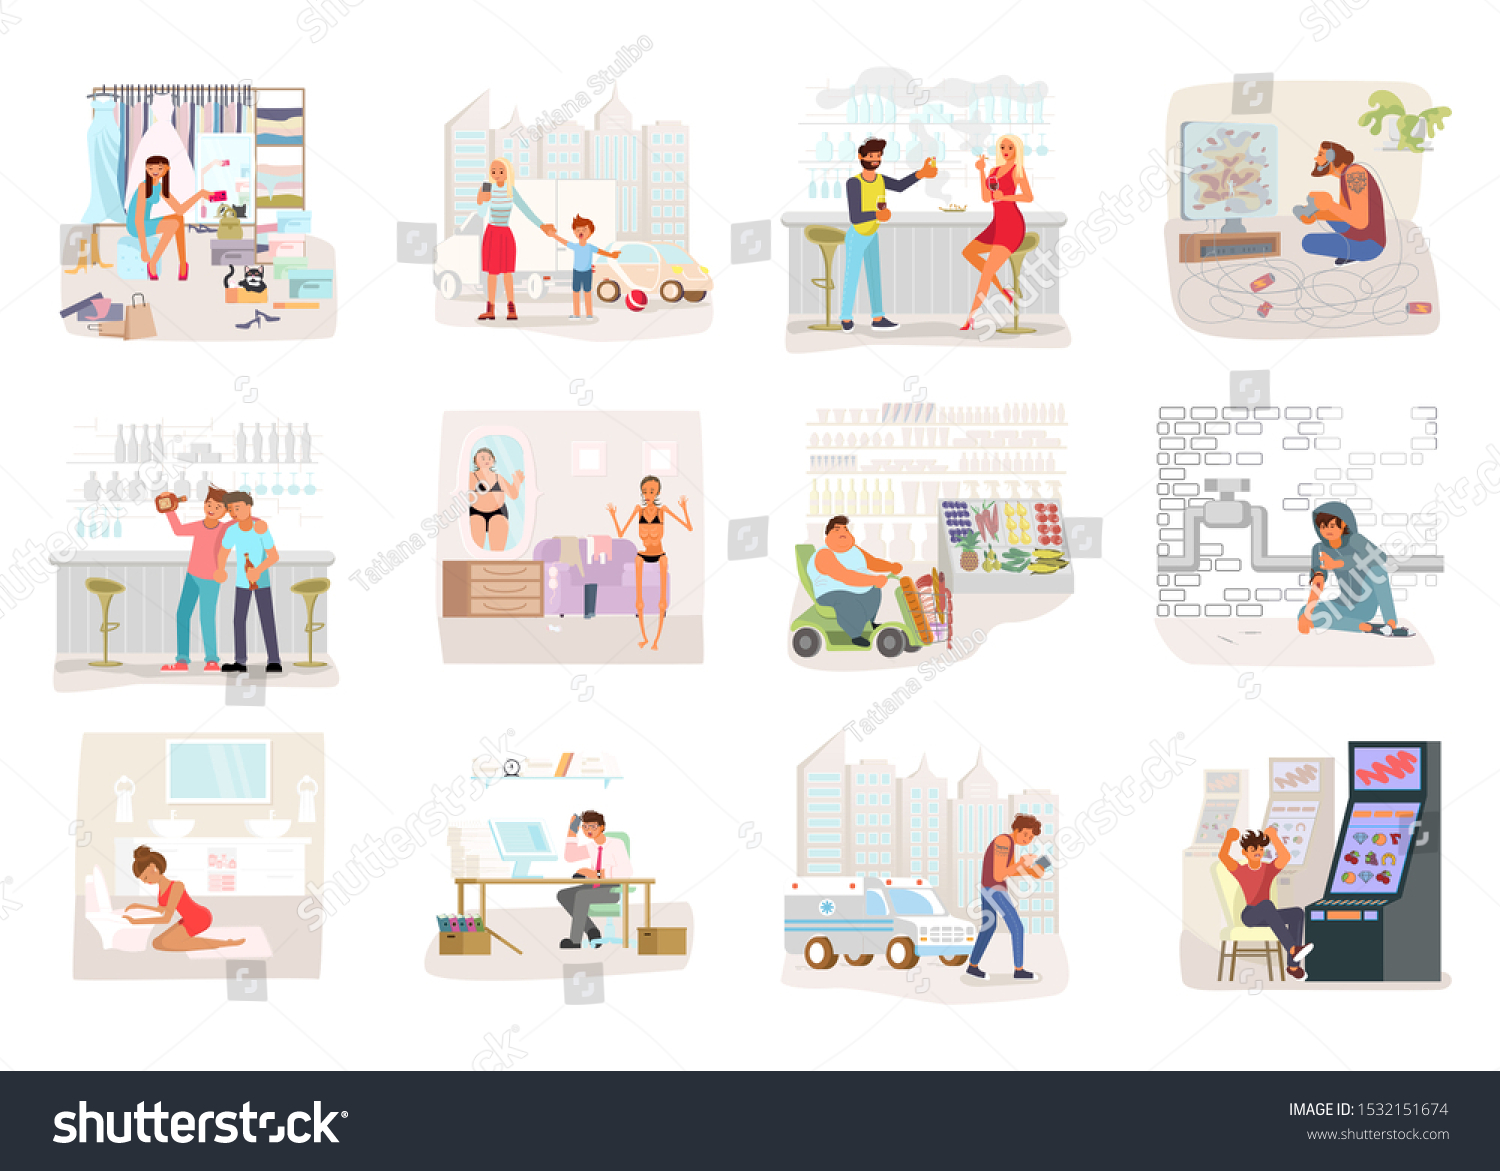 Set Addicted Bad Habits People Unhealthy Stock Vector Royalty Free 1532151674 8852